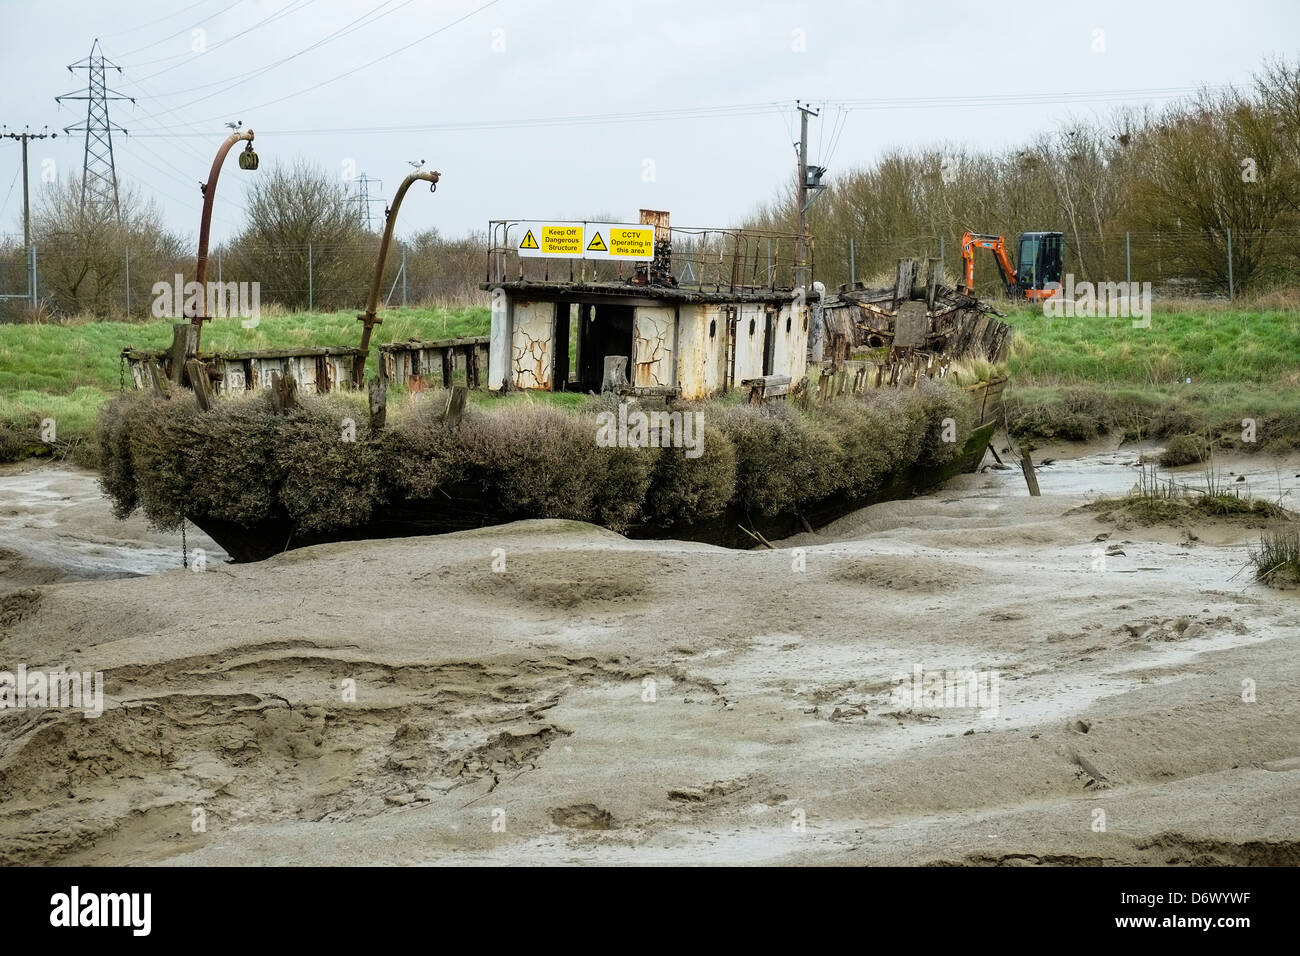 The wreck of the Lightship LV44 resting on the mud at Vange Creek in Pitsea in Essex. Stock Photo